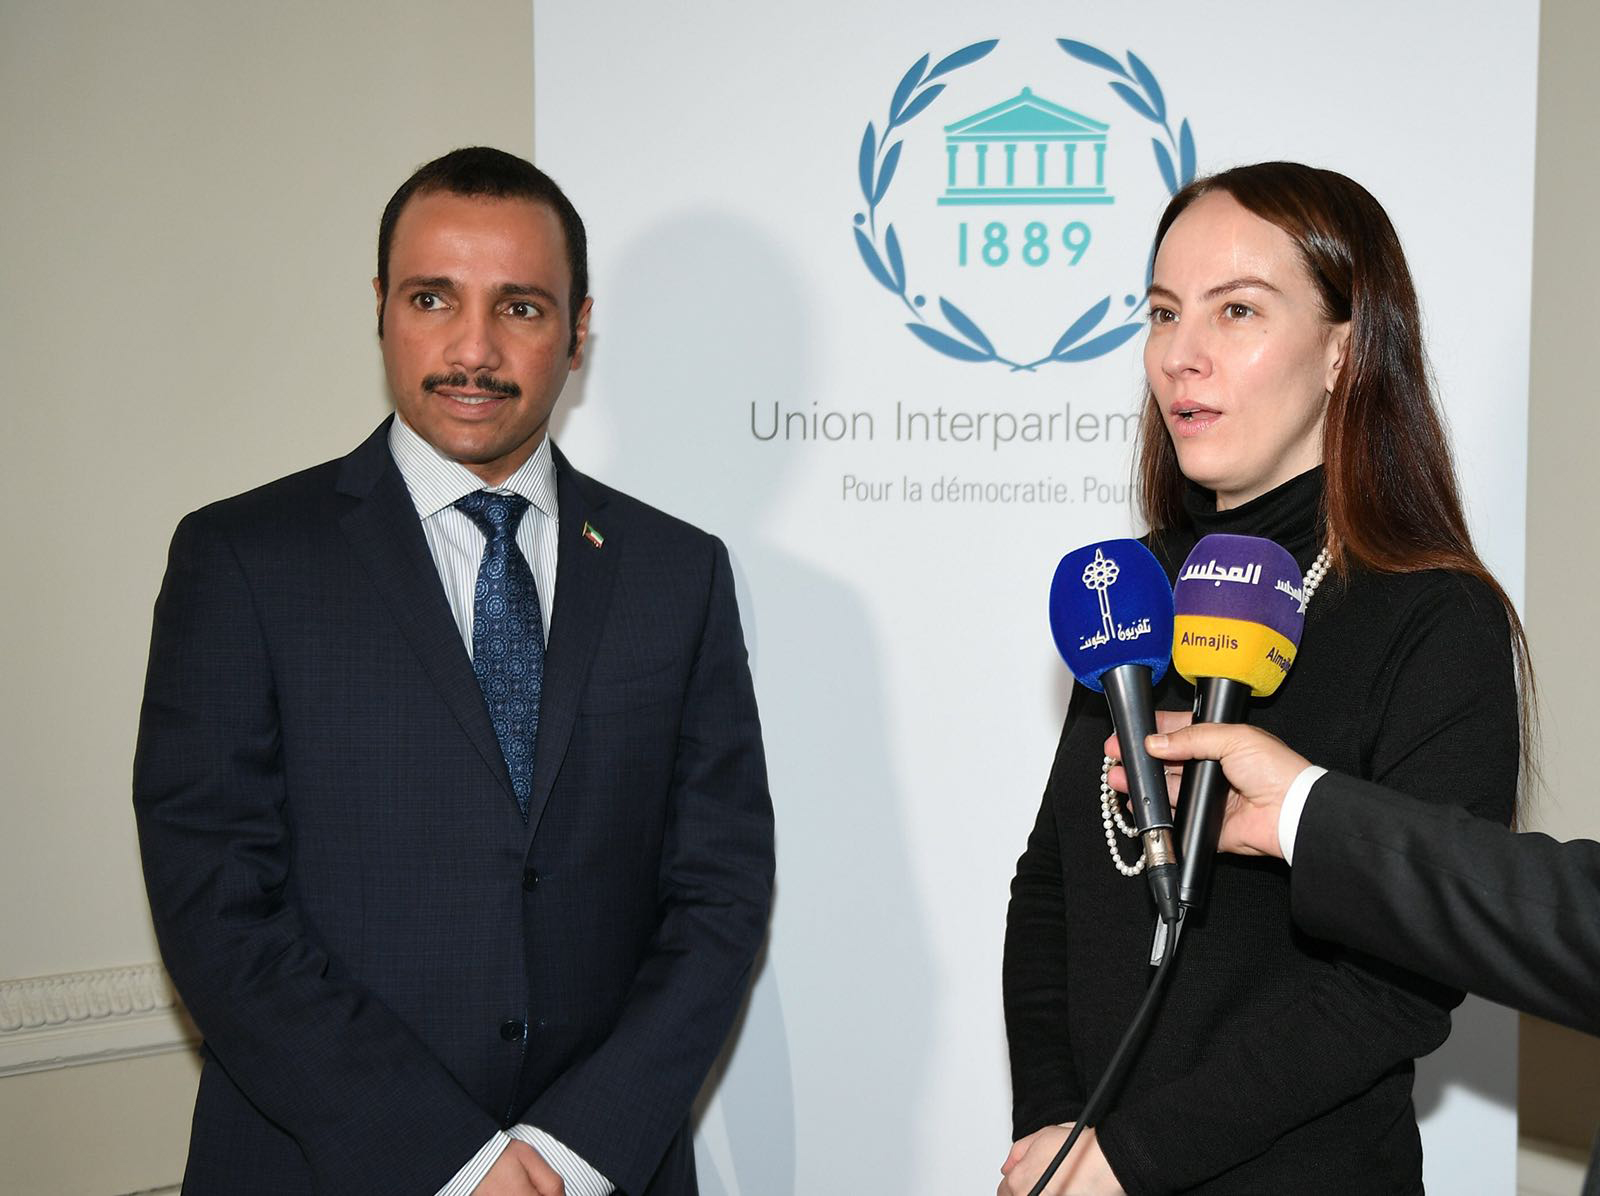 Speaker of the National Assembly Marzouq Ali Al-Ghanim meetis with President of the Inter-Parliamentary Union (IPU) Gabriela Barron